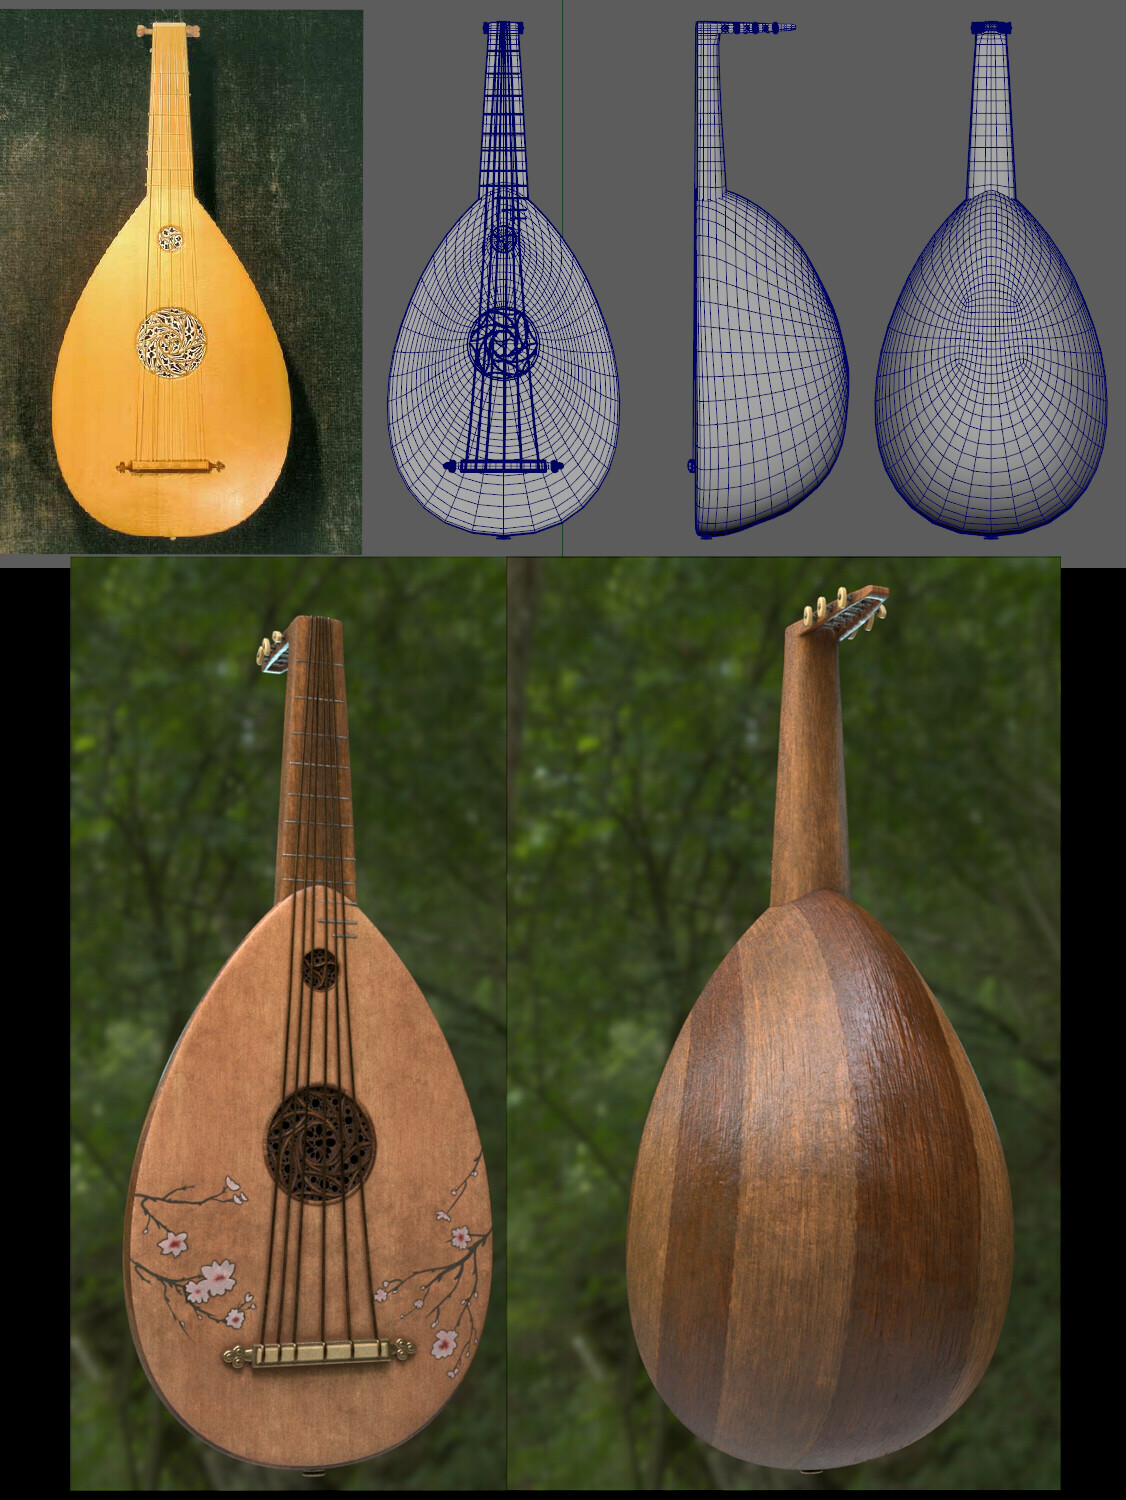 I developed the lute's body as accurate to real life as I could given the references.  I then took creative liberties when texturing the lute to make it match the character's overall aesthetic.